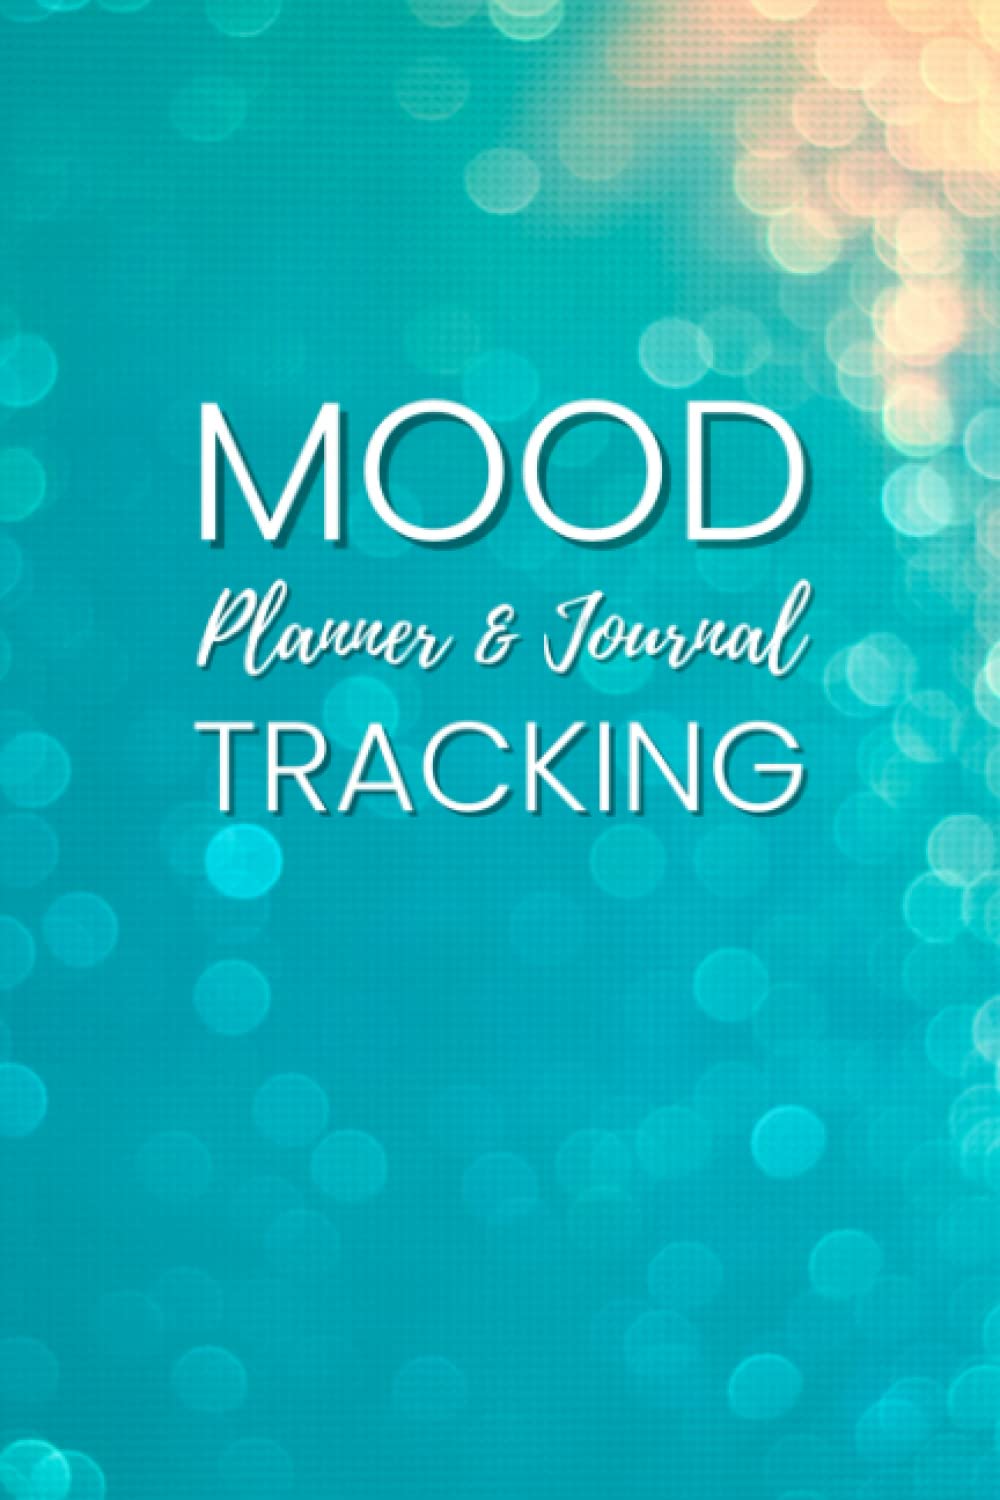 Mood Tracker Journal Daily: Health & Wellness Diary with Prompts, Personal Planner for Your Mood, Sleep, Energy, Activities, Food Intake, Gratitude, and Goals, 120 Pages Small Size 6 x 9 inches